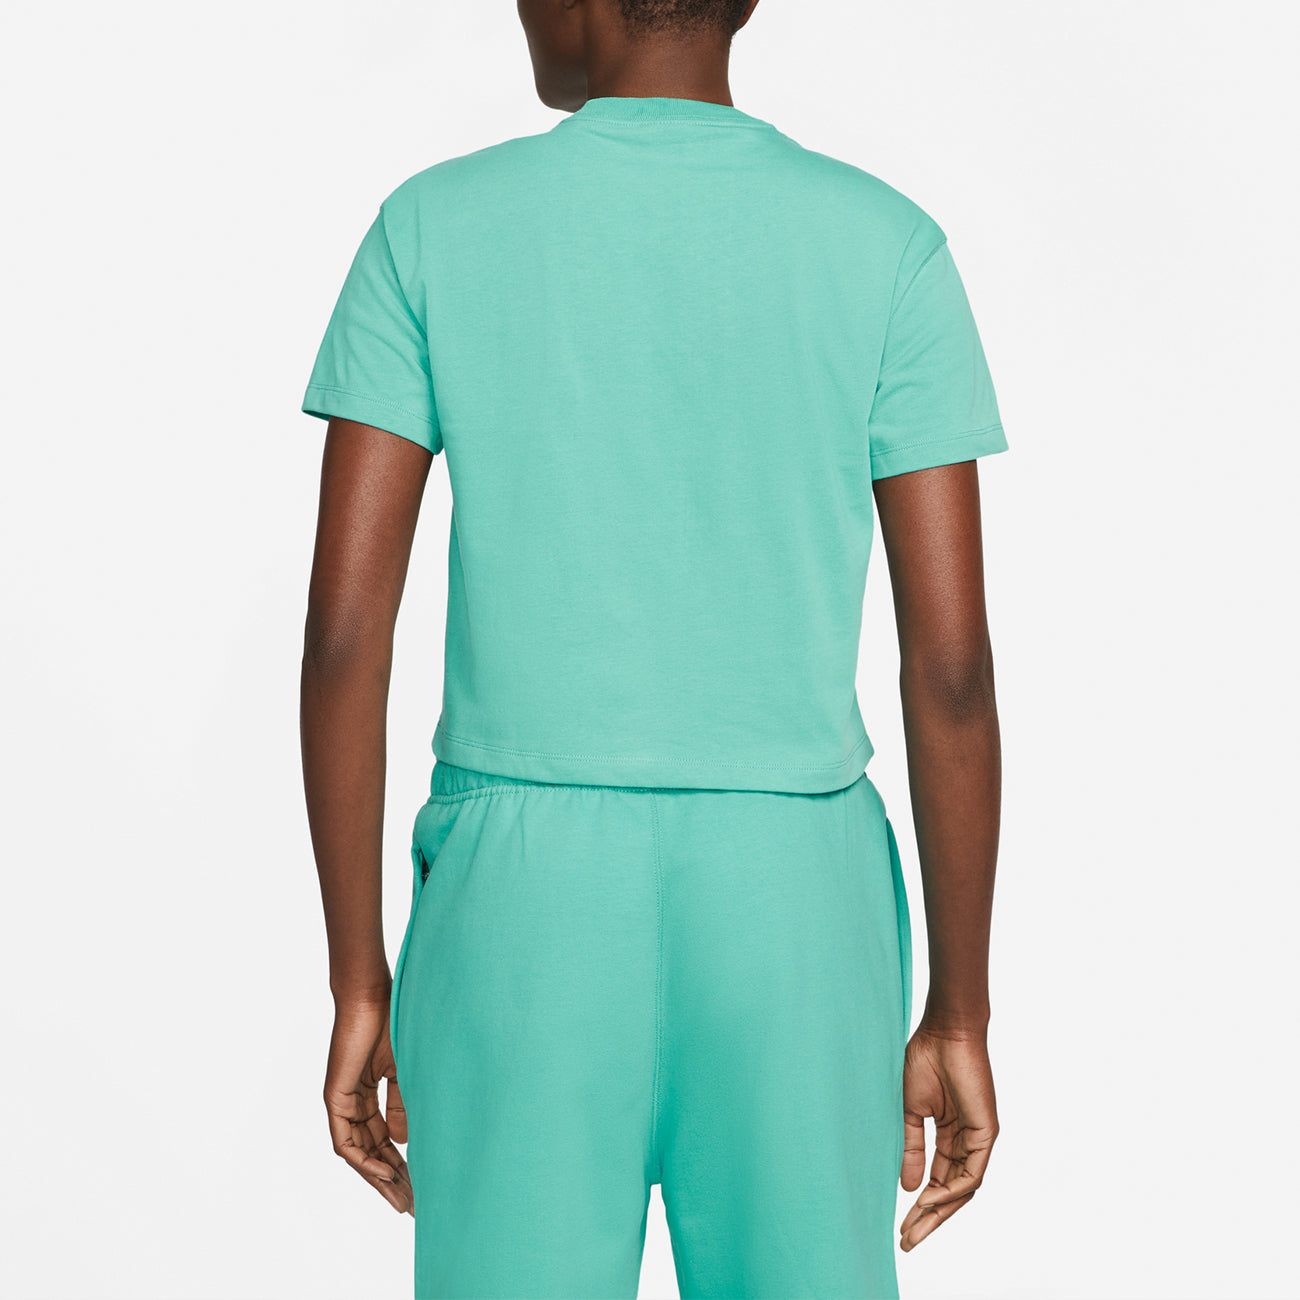 Women's NRG Soloswoosh SS Tee - Washed Teal/White